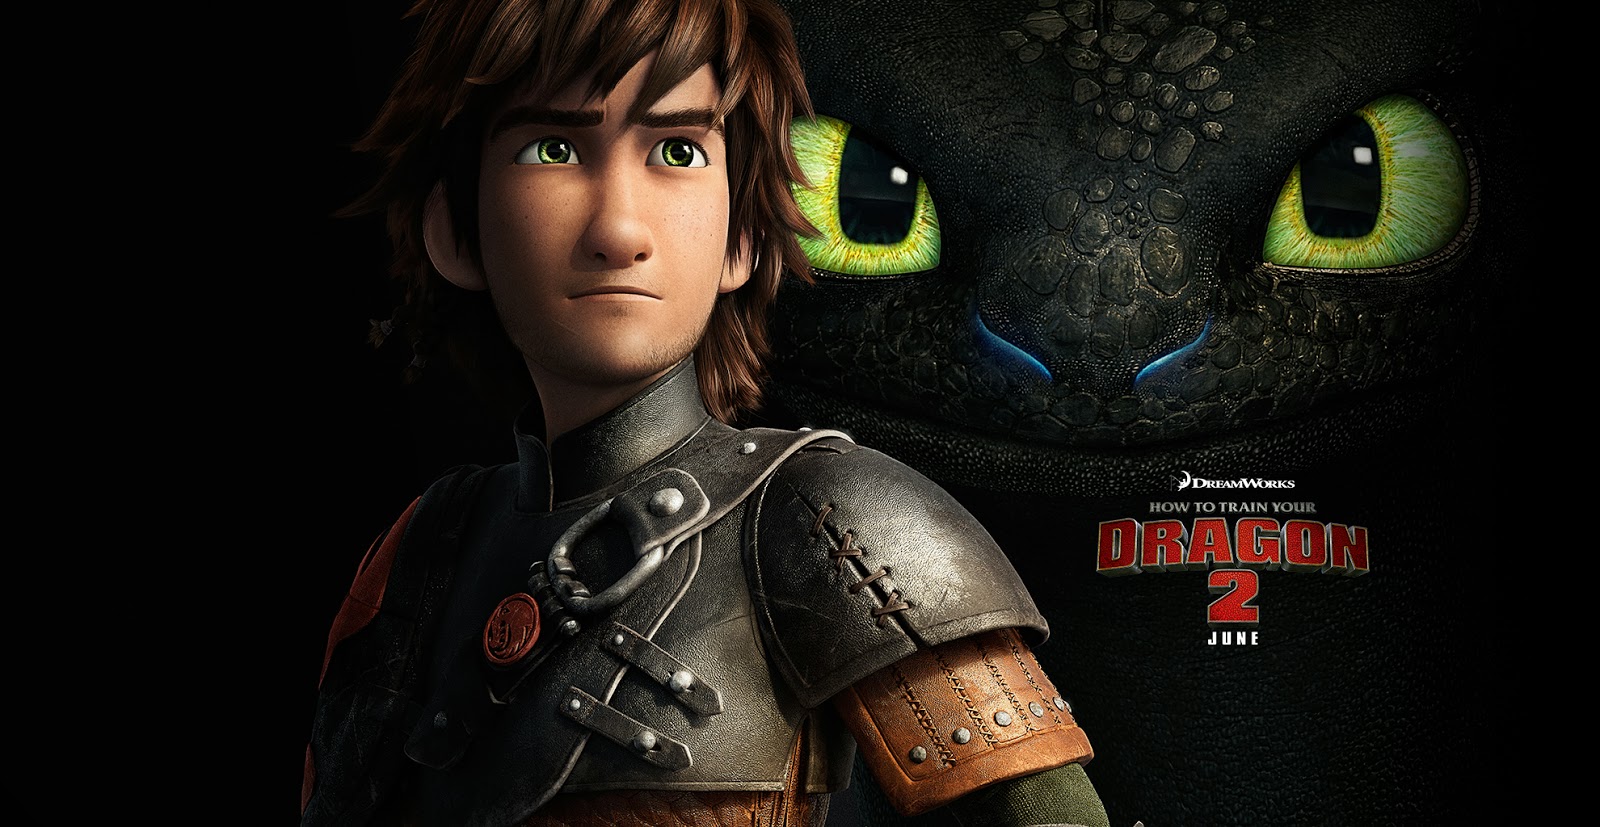 how-to-train-your-dragon-image-how-to-train-your-dragon.jpg